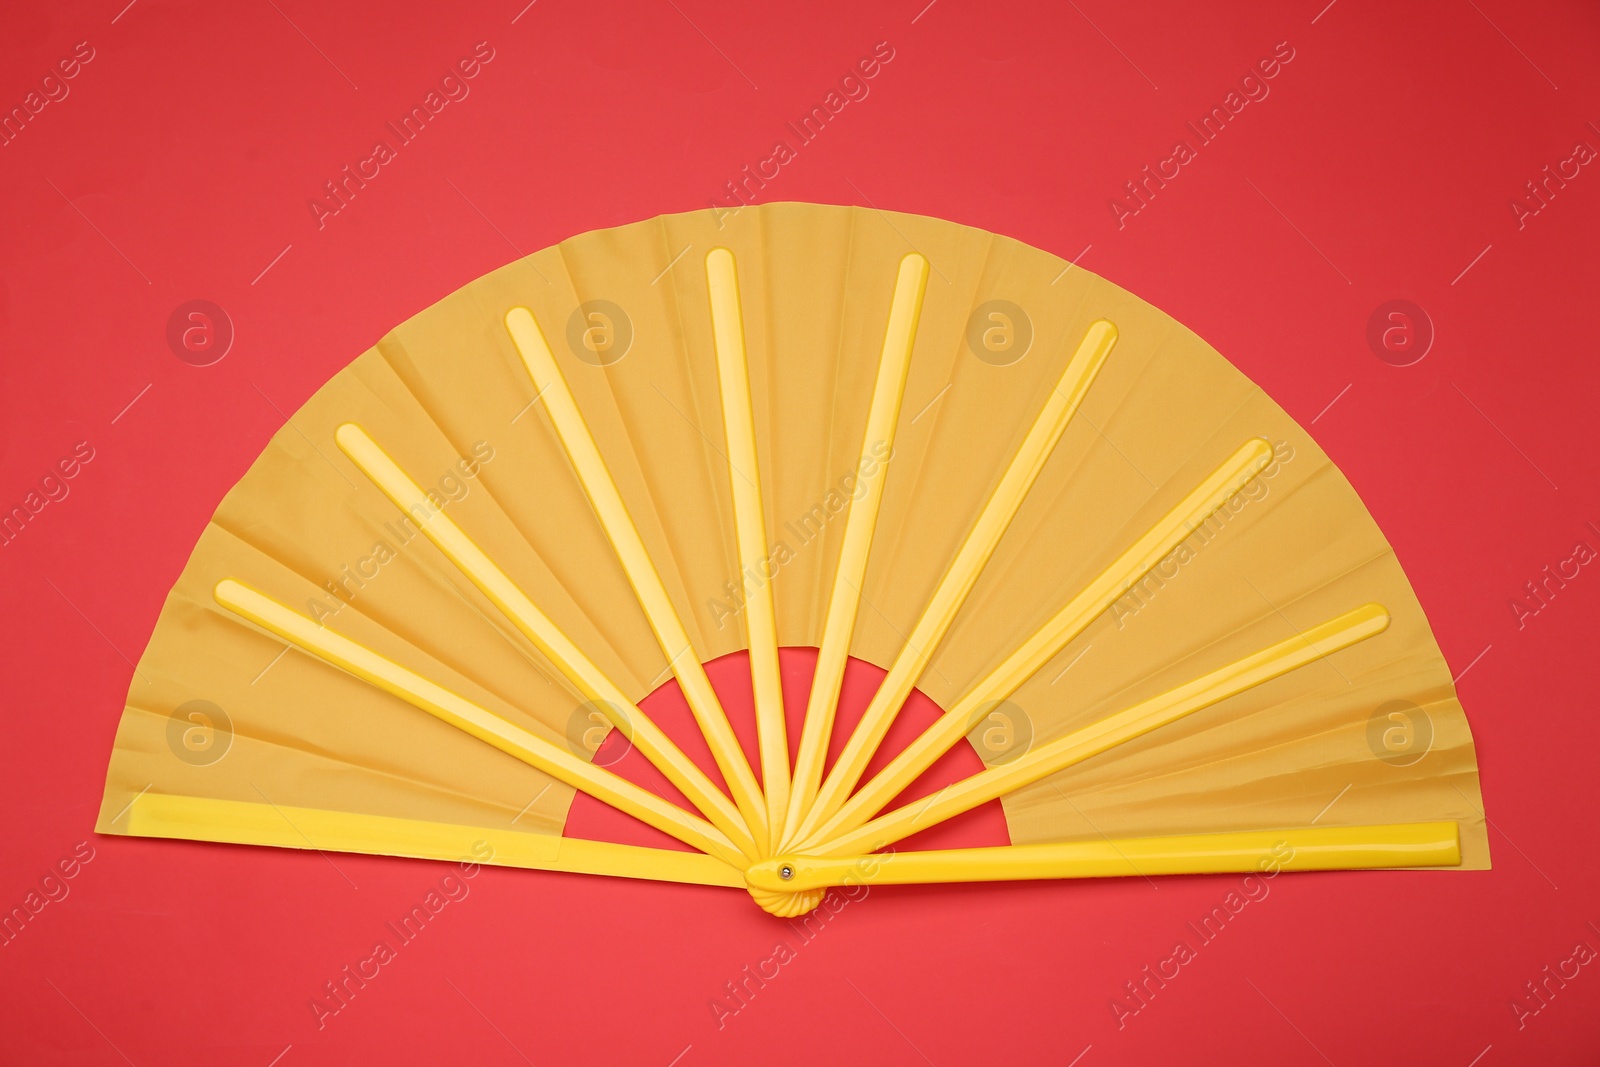 Photo of Bright yellow hand fan on red background, top view